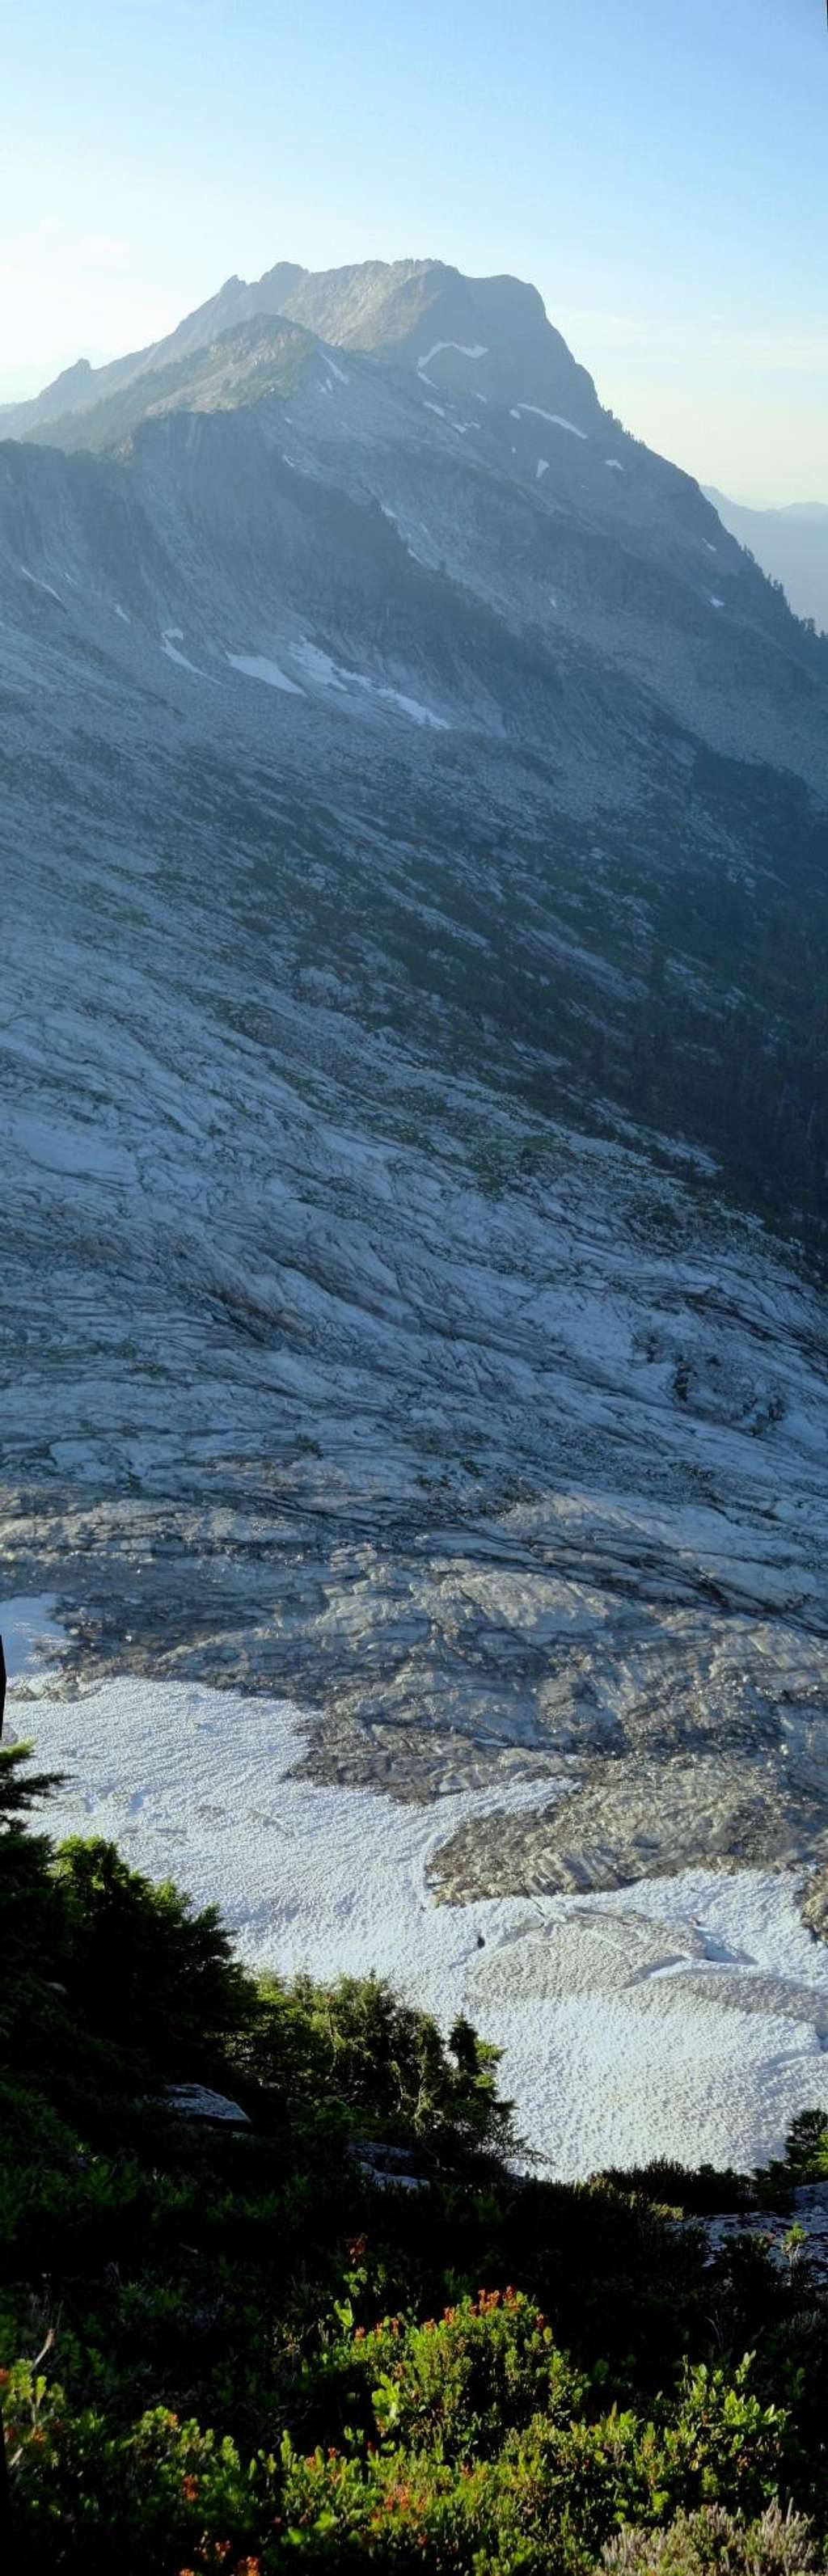 Vertical Pano Of Big Four Mtn